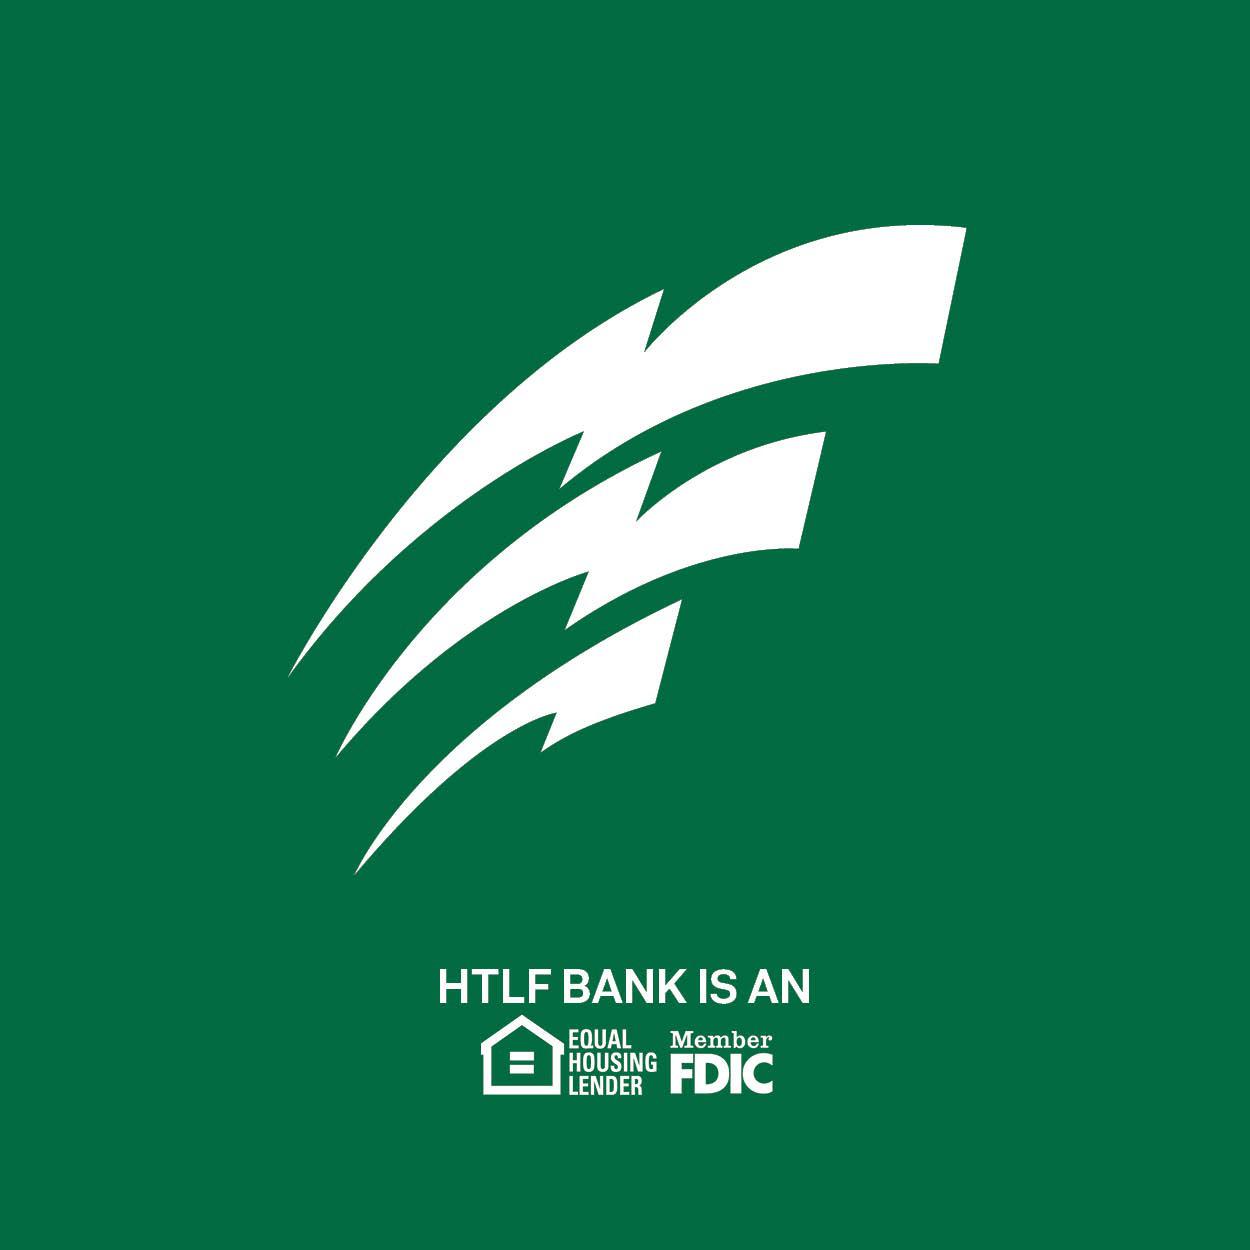 First Bank & Trust, a division of HTLF Bank